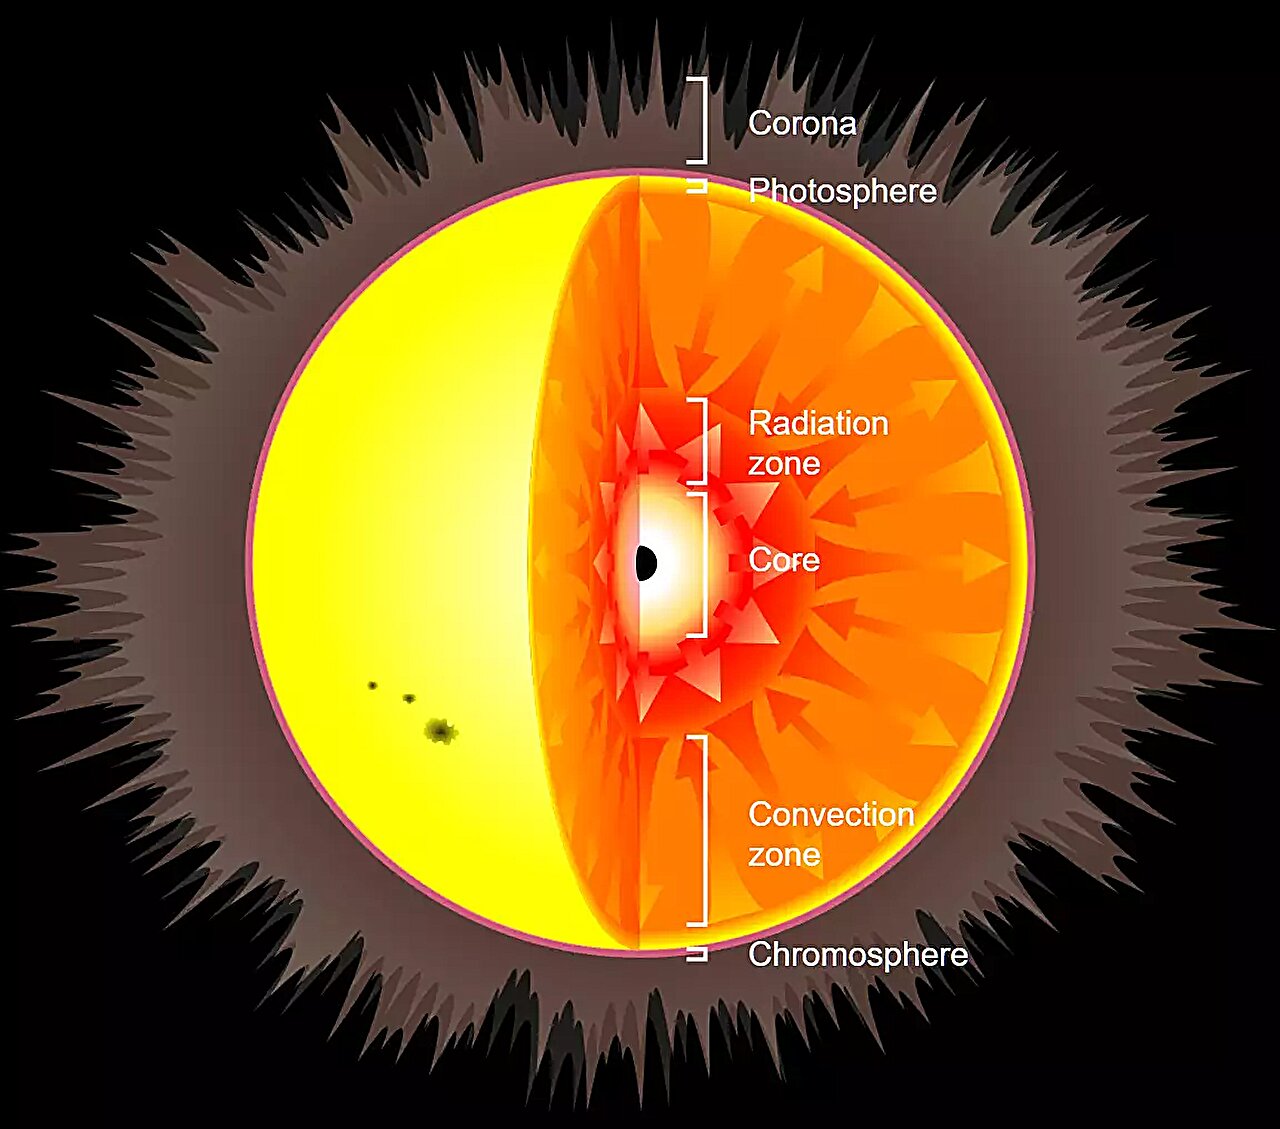 What occurs when a black hole is introduced into the sun?